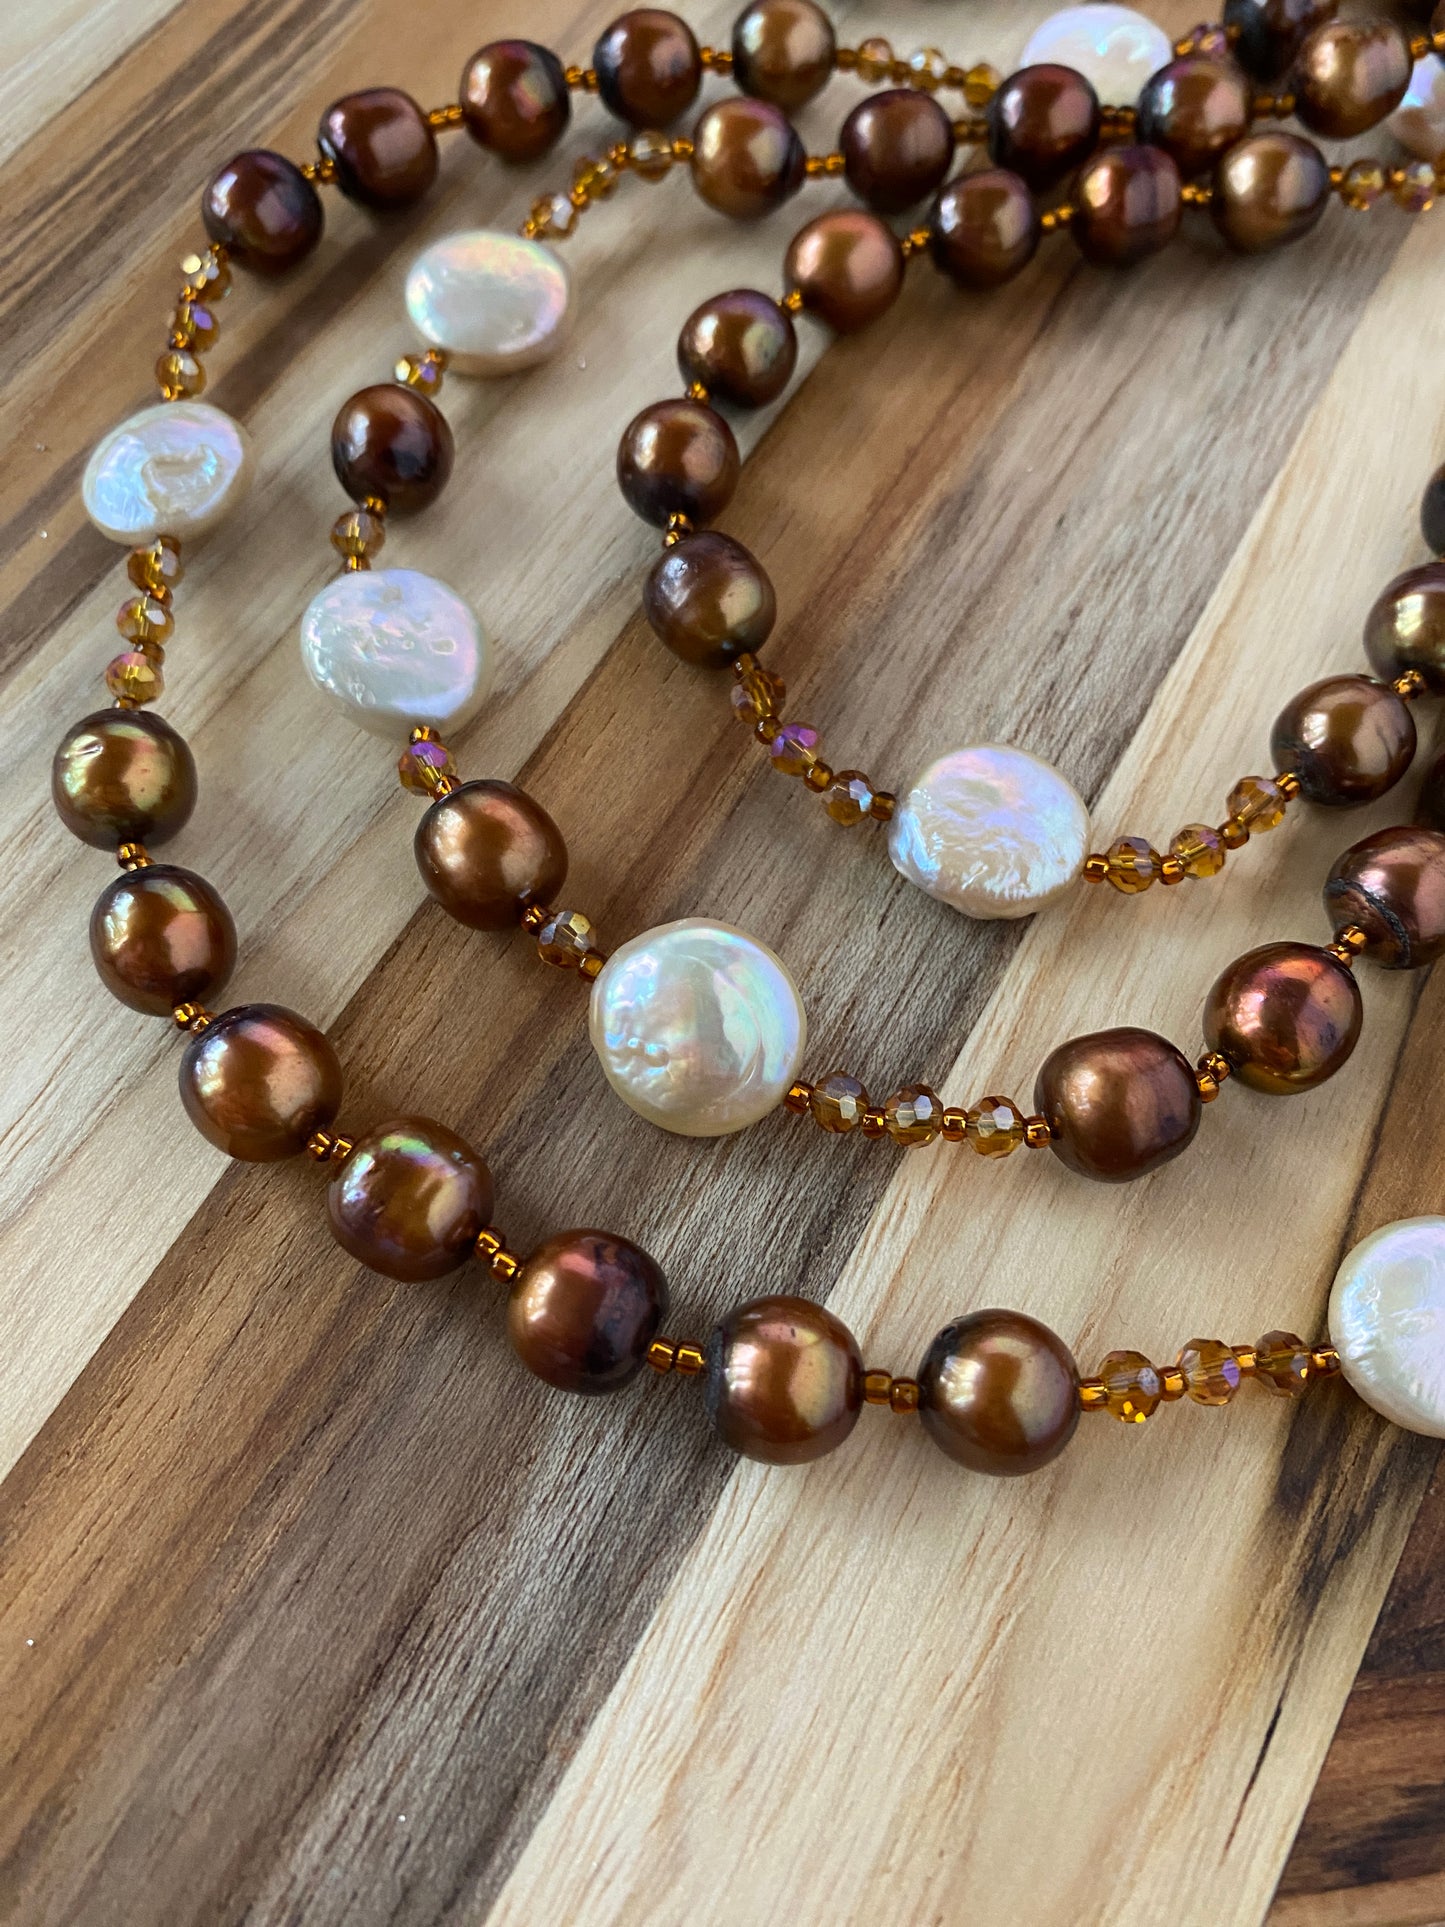 60" Extra Long Beaded Necklace with Brown, & Pale Peach Pearls & Crystal Beads